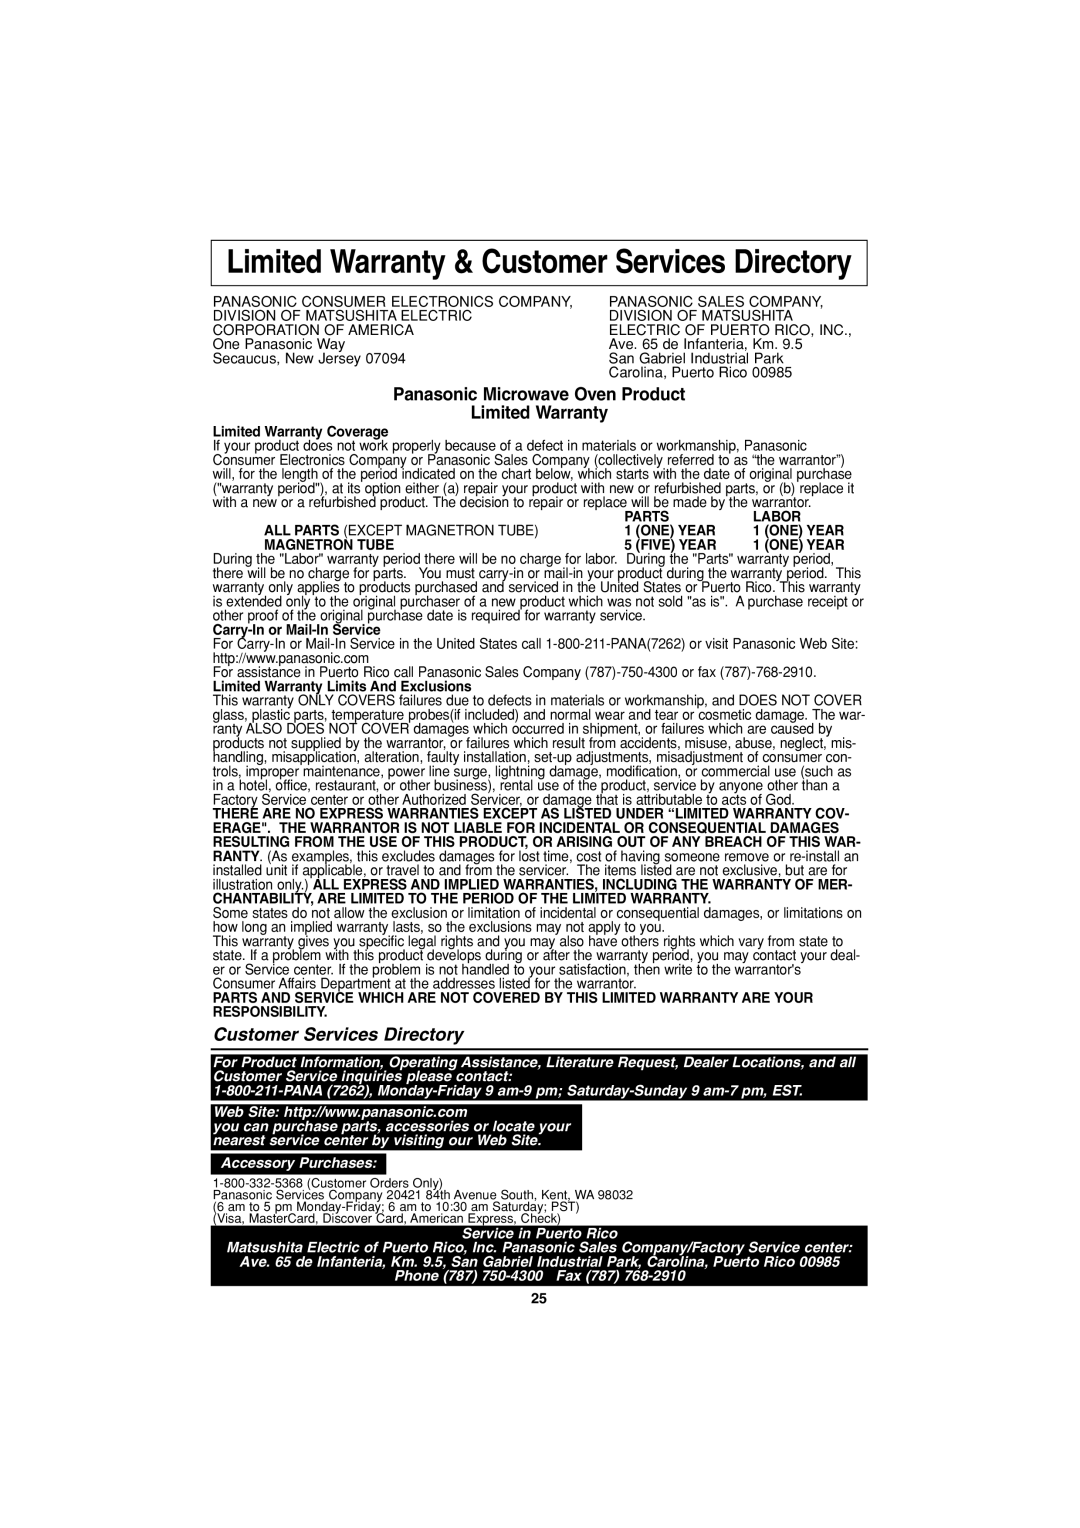 Panasonic NN-S443 Limited Warranty & Customer Services Directory, Limited Warranty Coverage, Parts, Labor, One Year 